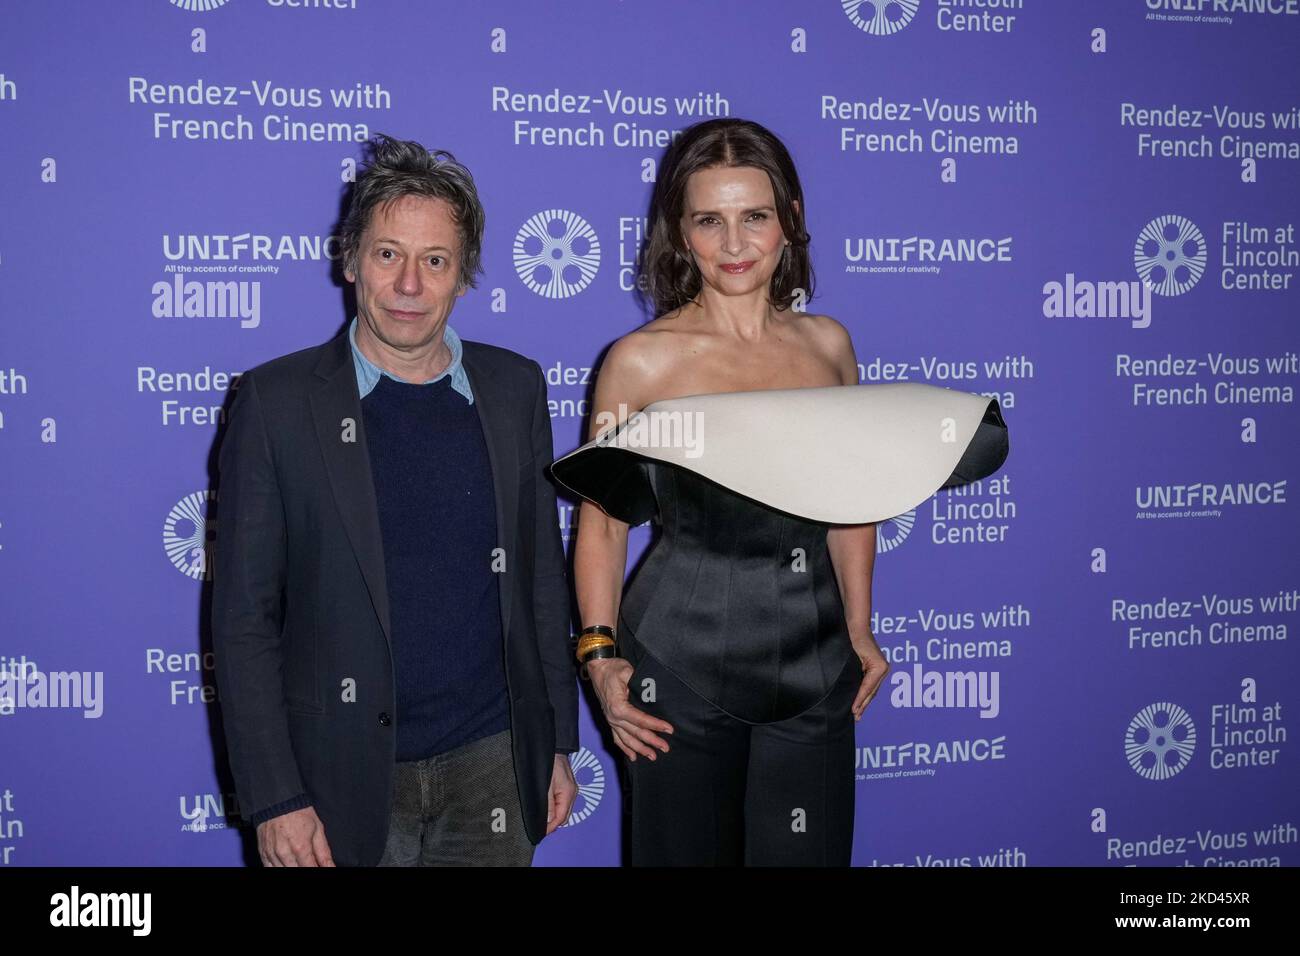 Mathieu Amalric (L) and Juliette Binoche attend Film at Lincoln Center's Rendez-Vous With French Cinema opening night screening of 'Fire' at Walter Reade Theater on March 03, 2022 in New York City. (Photo by John Nacion/NurPhoto) Stock Photo